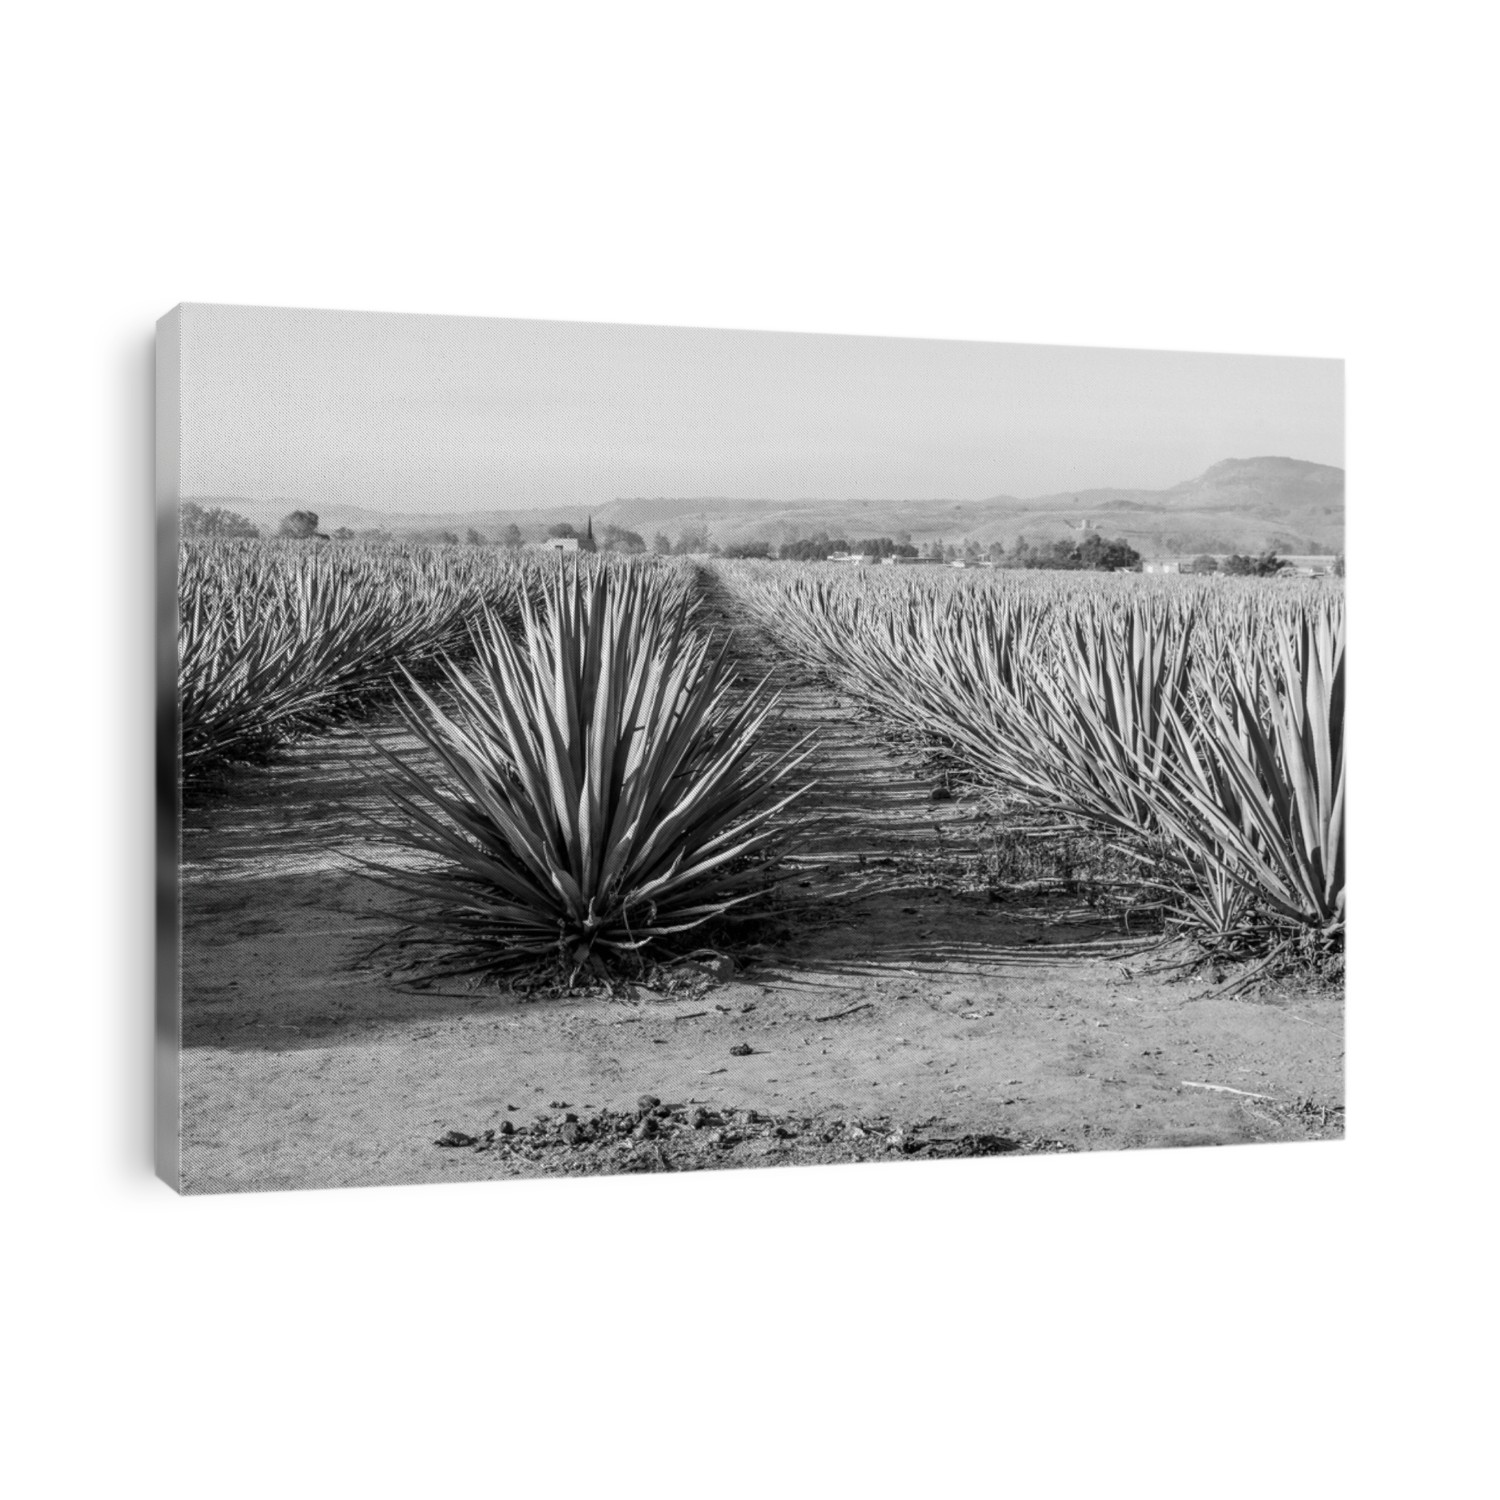 Landscape of agave plants to produce tequila. Mexico. Black and white.